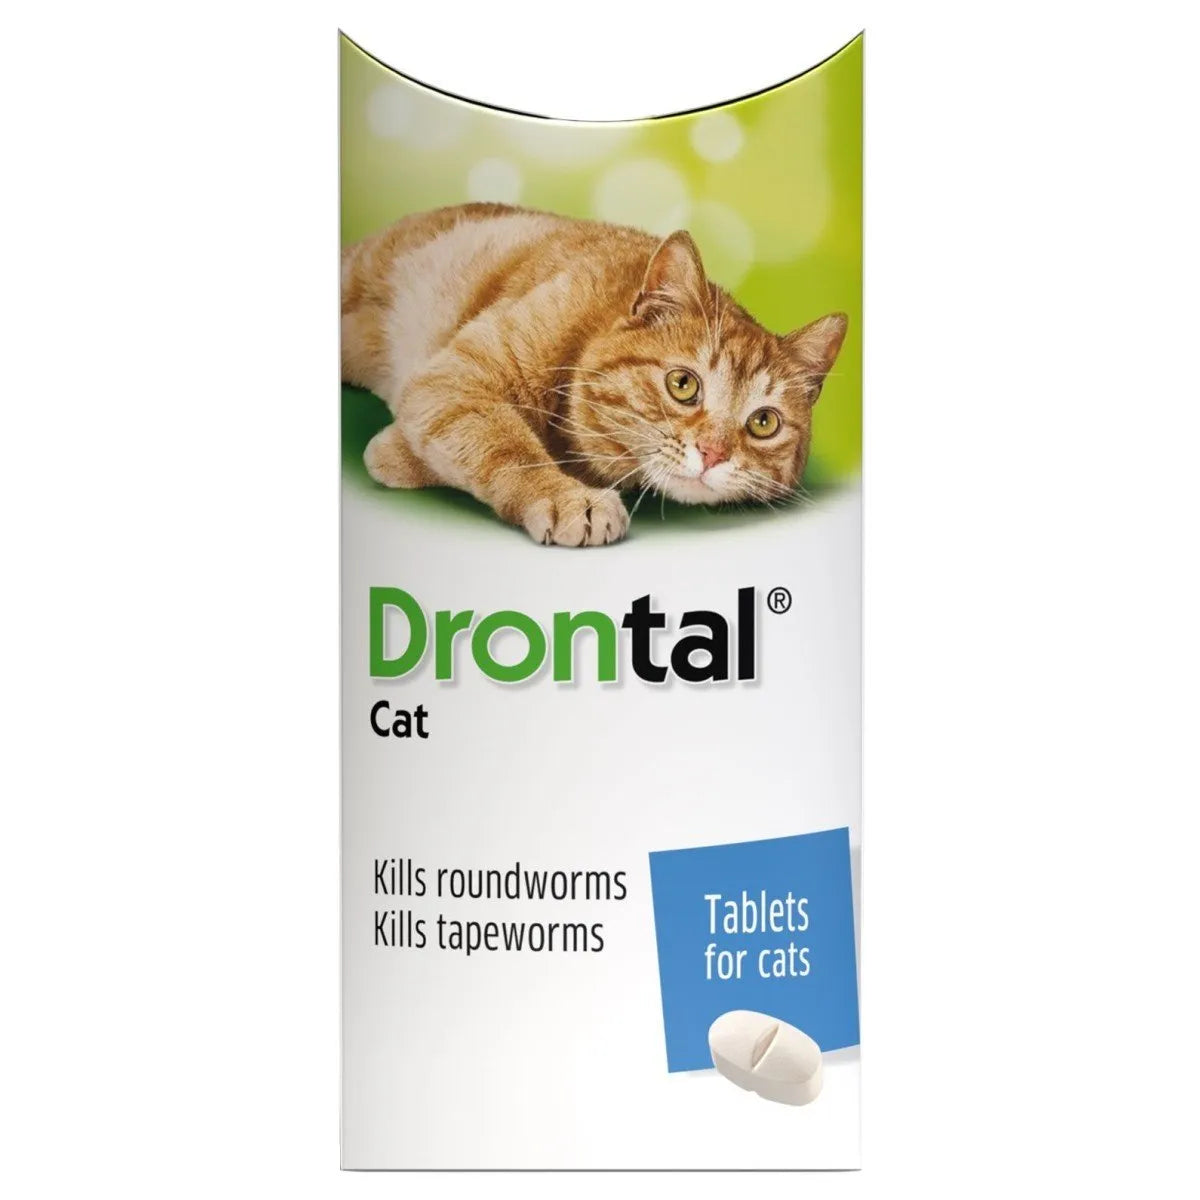 Drontal Cat Film-Coated Tablets